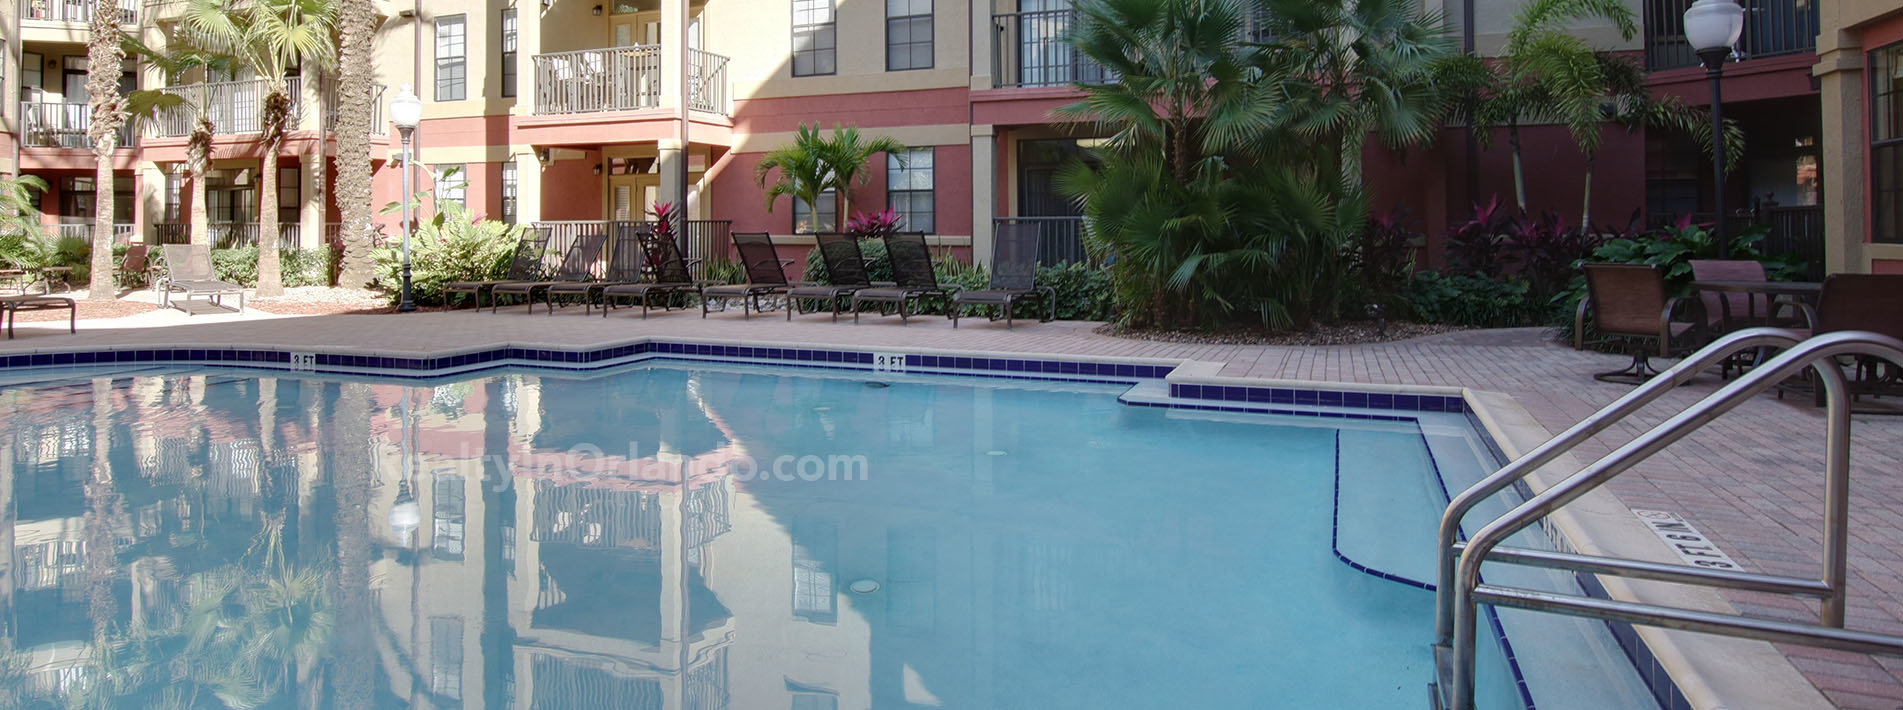 Uptown Place Downtown Orlando Condo Pool